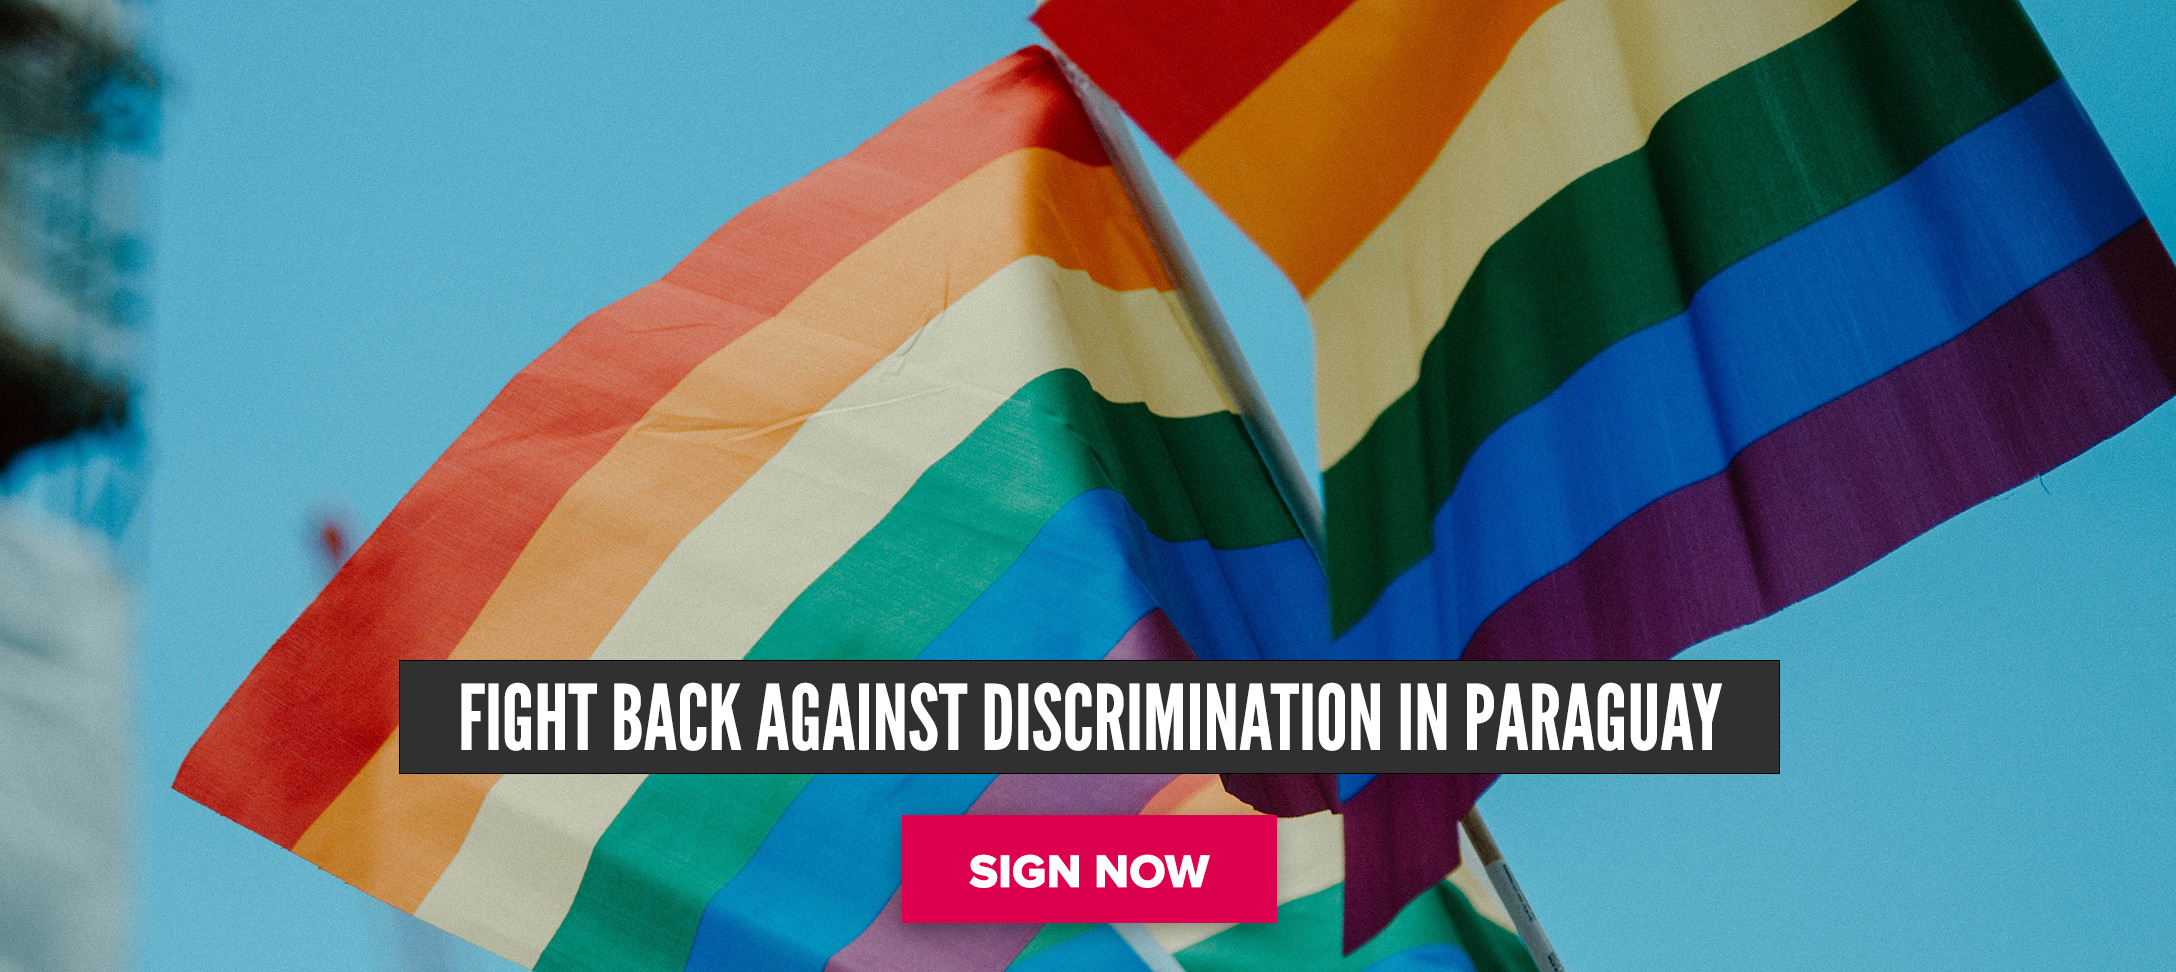 Fight back against discrimination in Paraguay